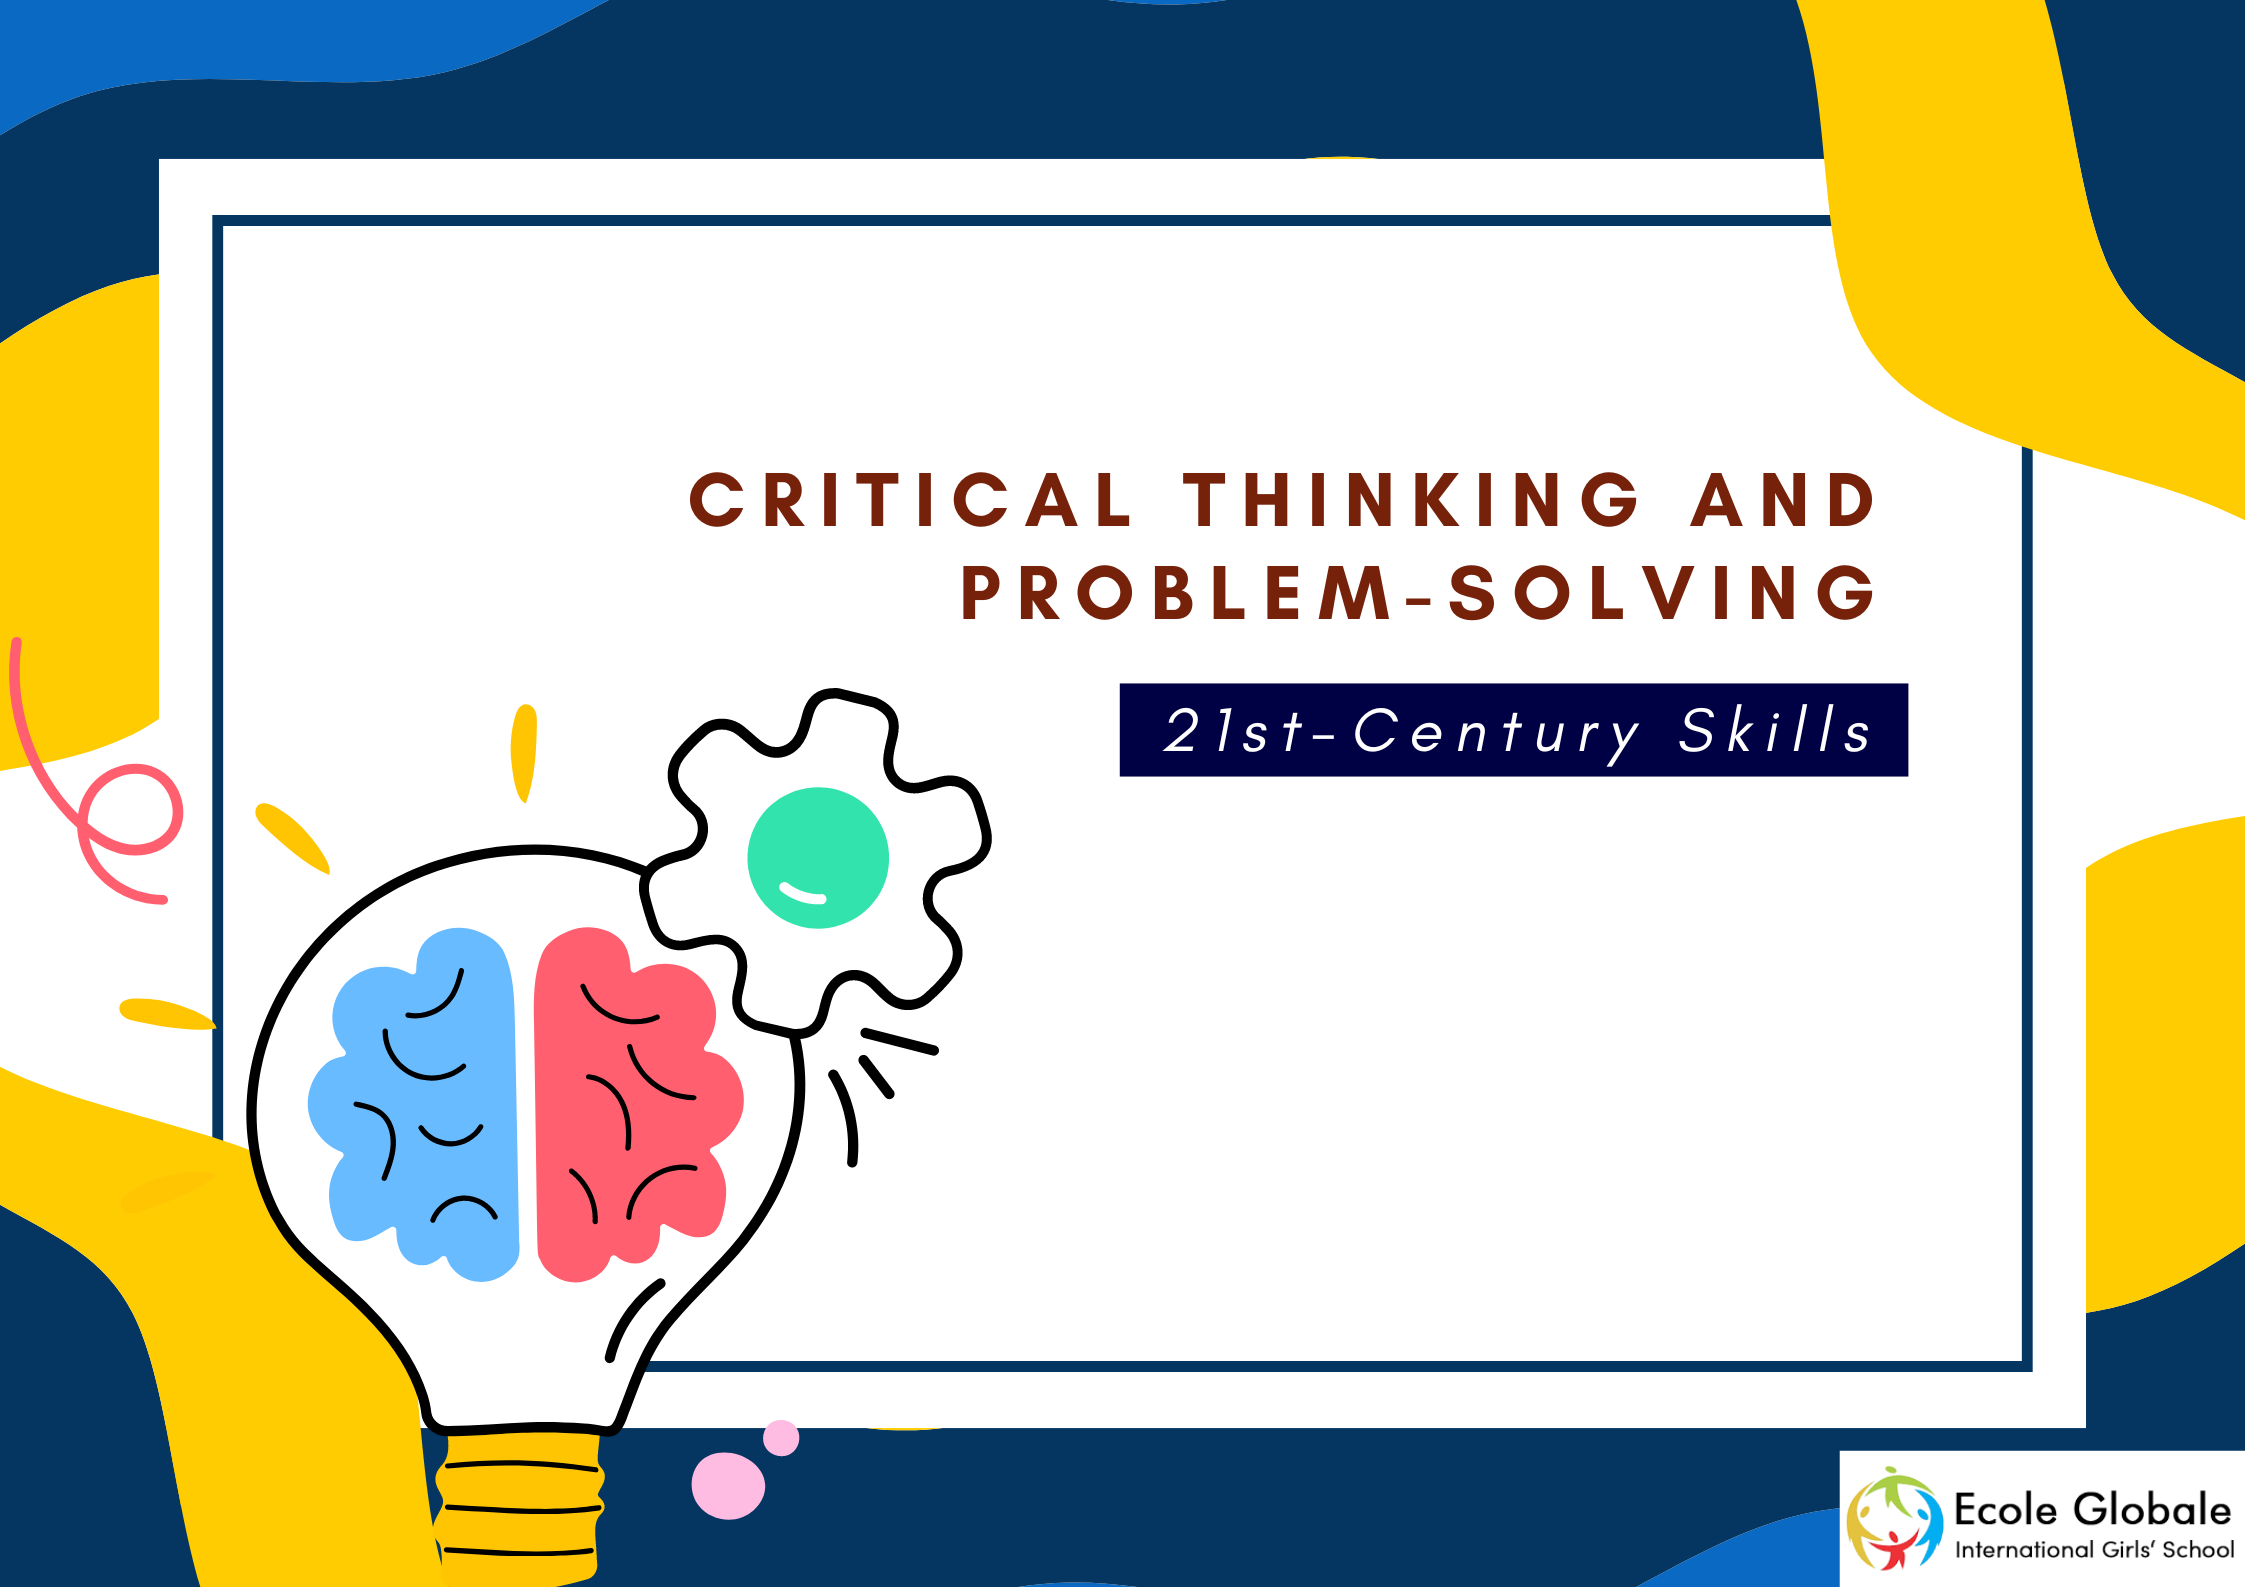 You are currently viewing 21st-Century Skills: Critical Thinking and Problem-Solving at Ecole Globale